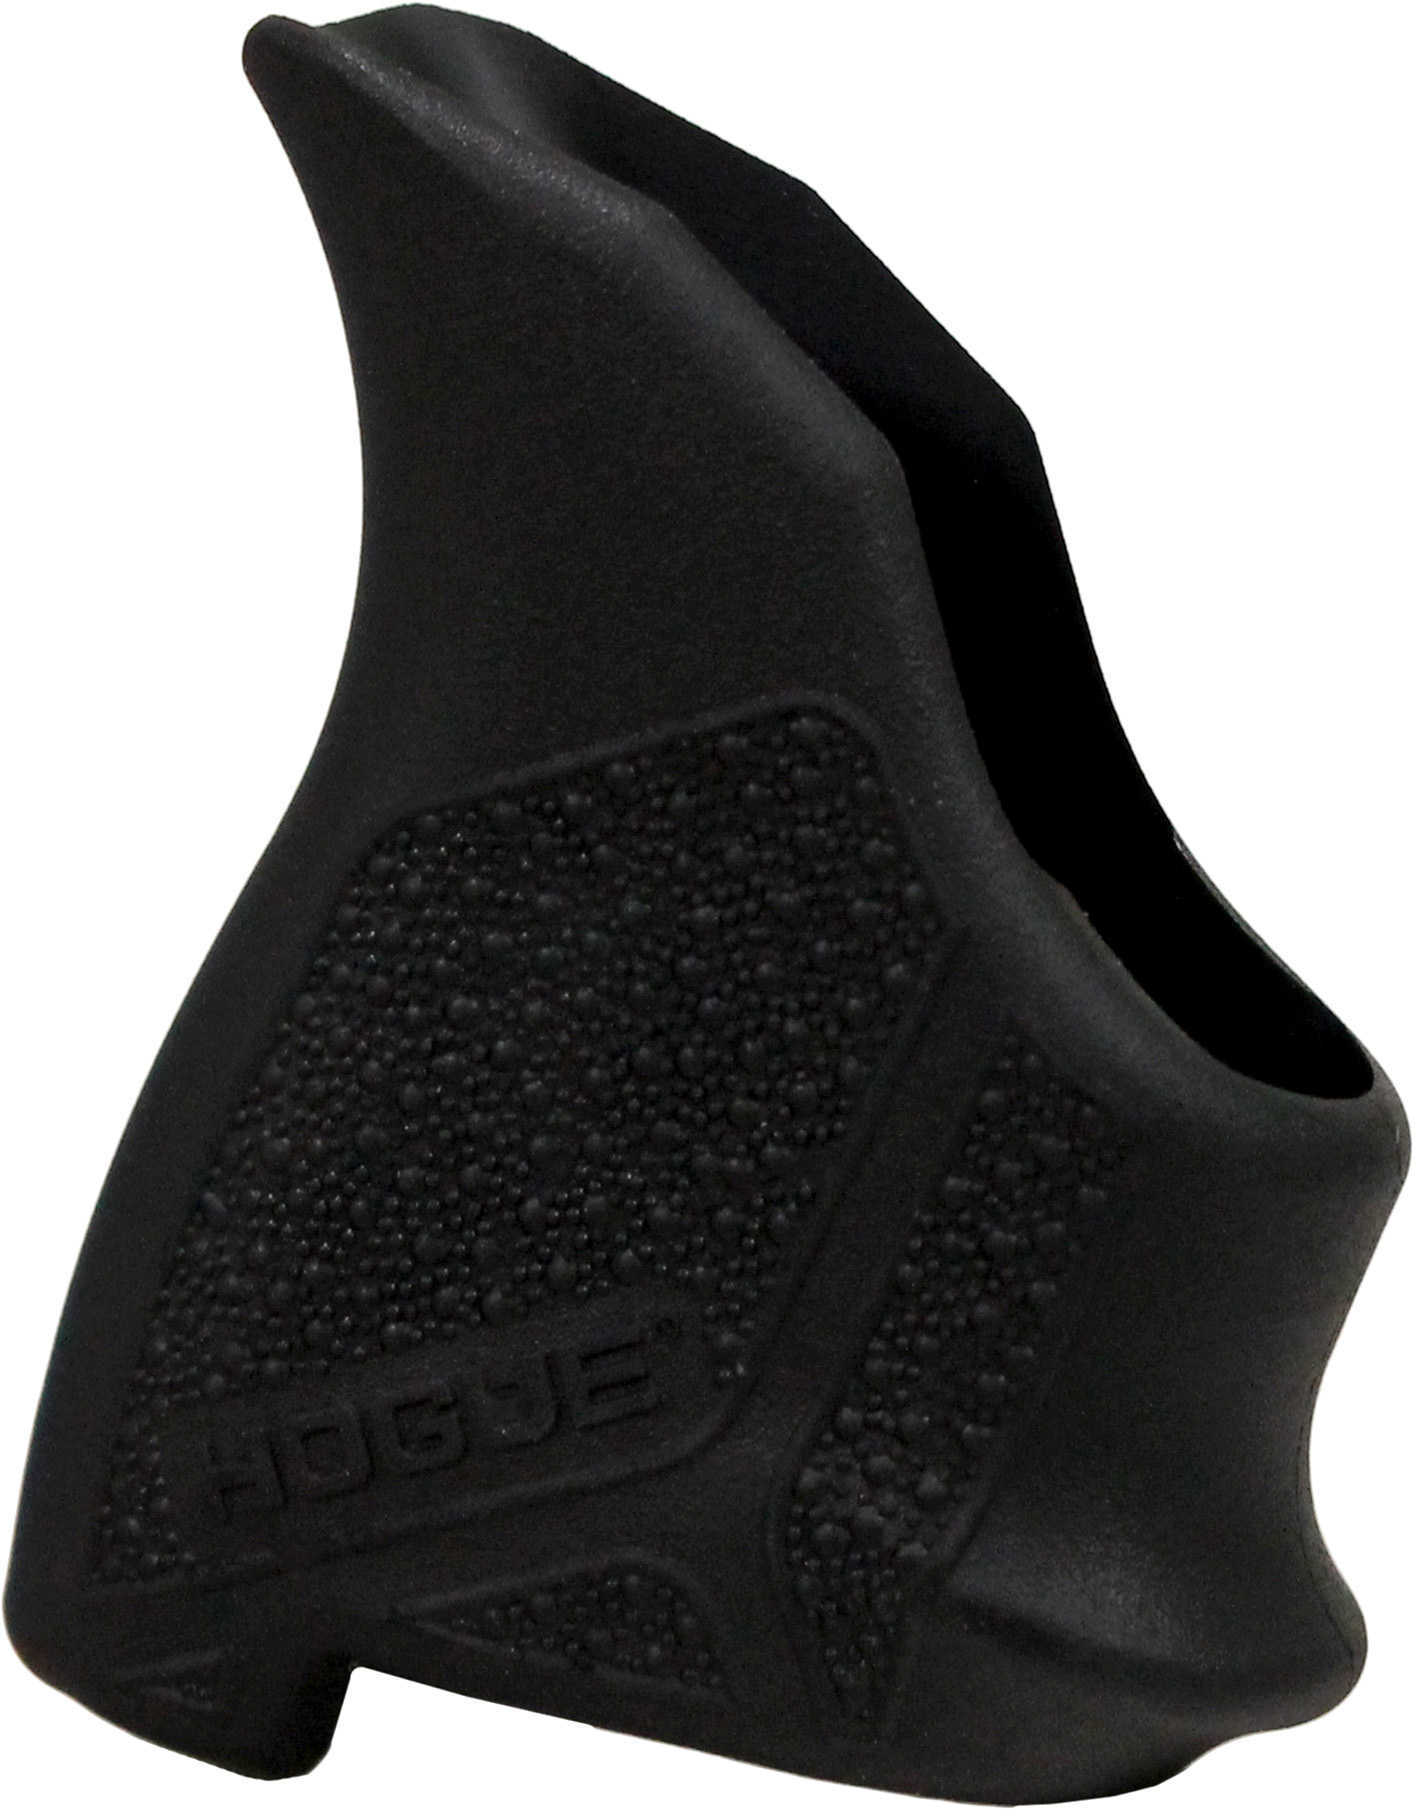 Hogue Grips HandAll Beavertail Pistol Fits Ruger LCP II Rubber Finger Grooves Black 18120